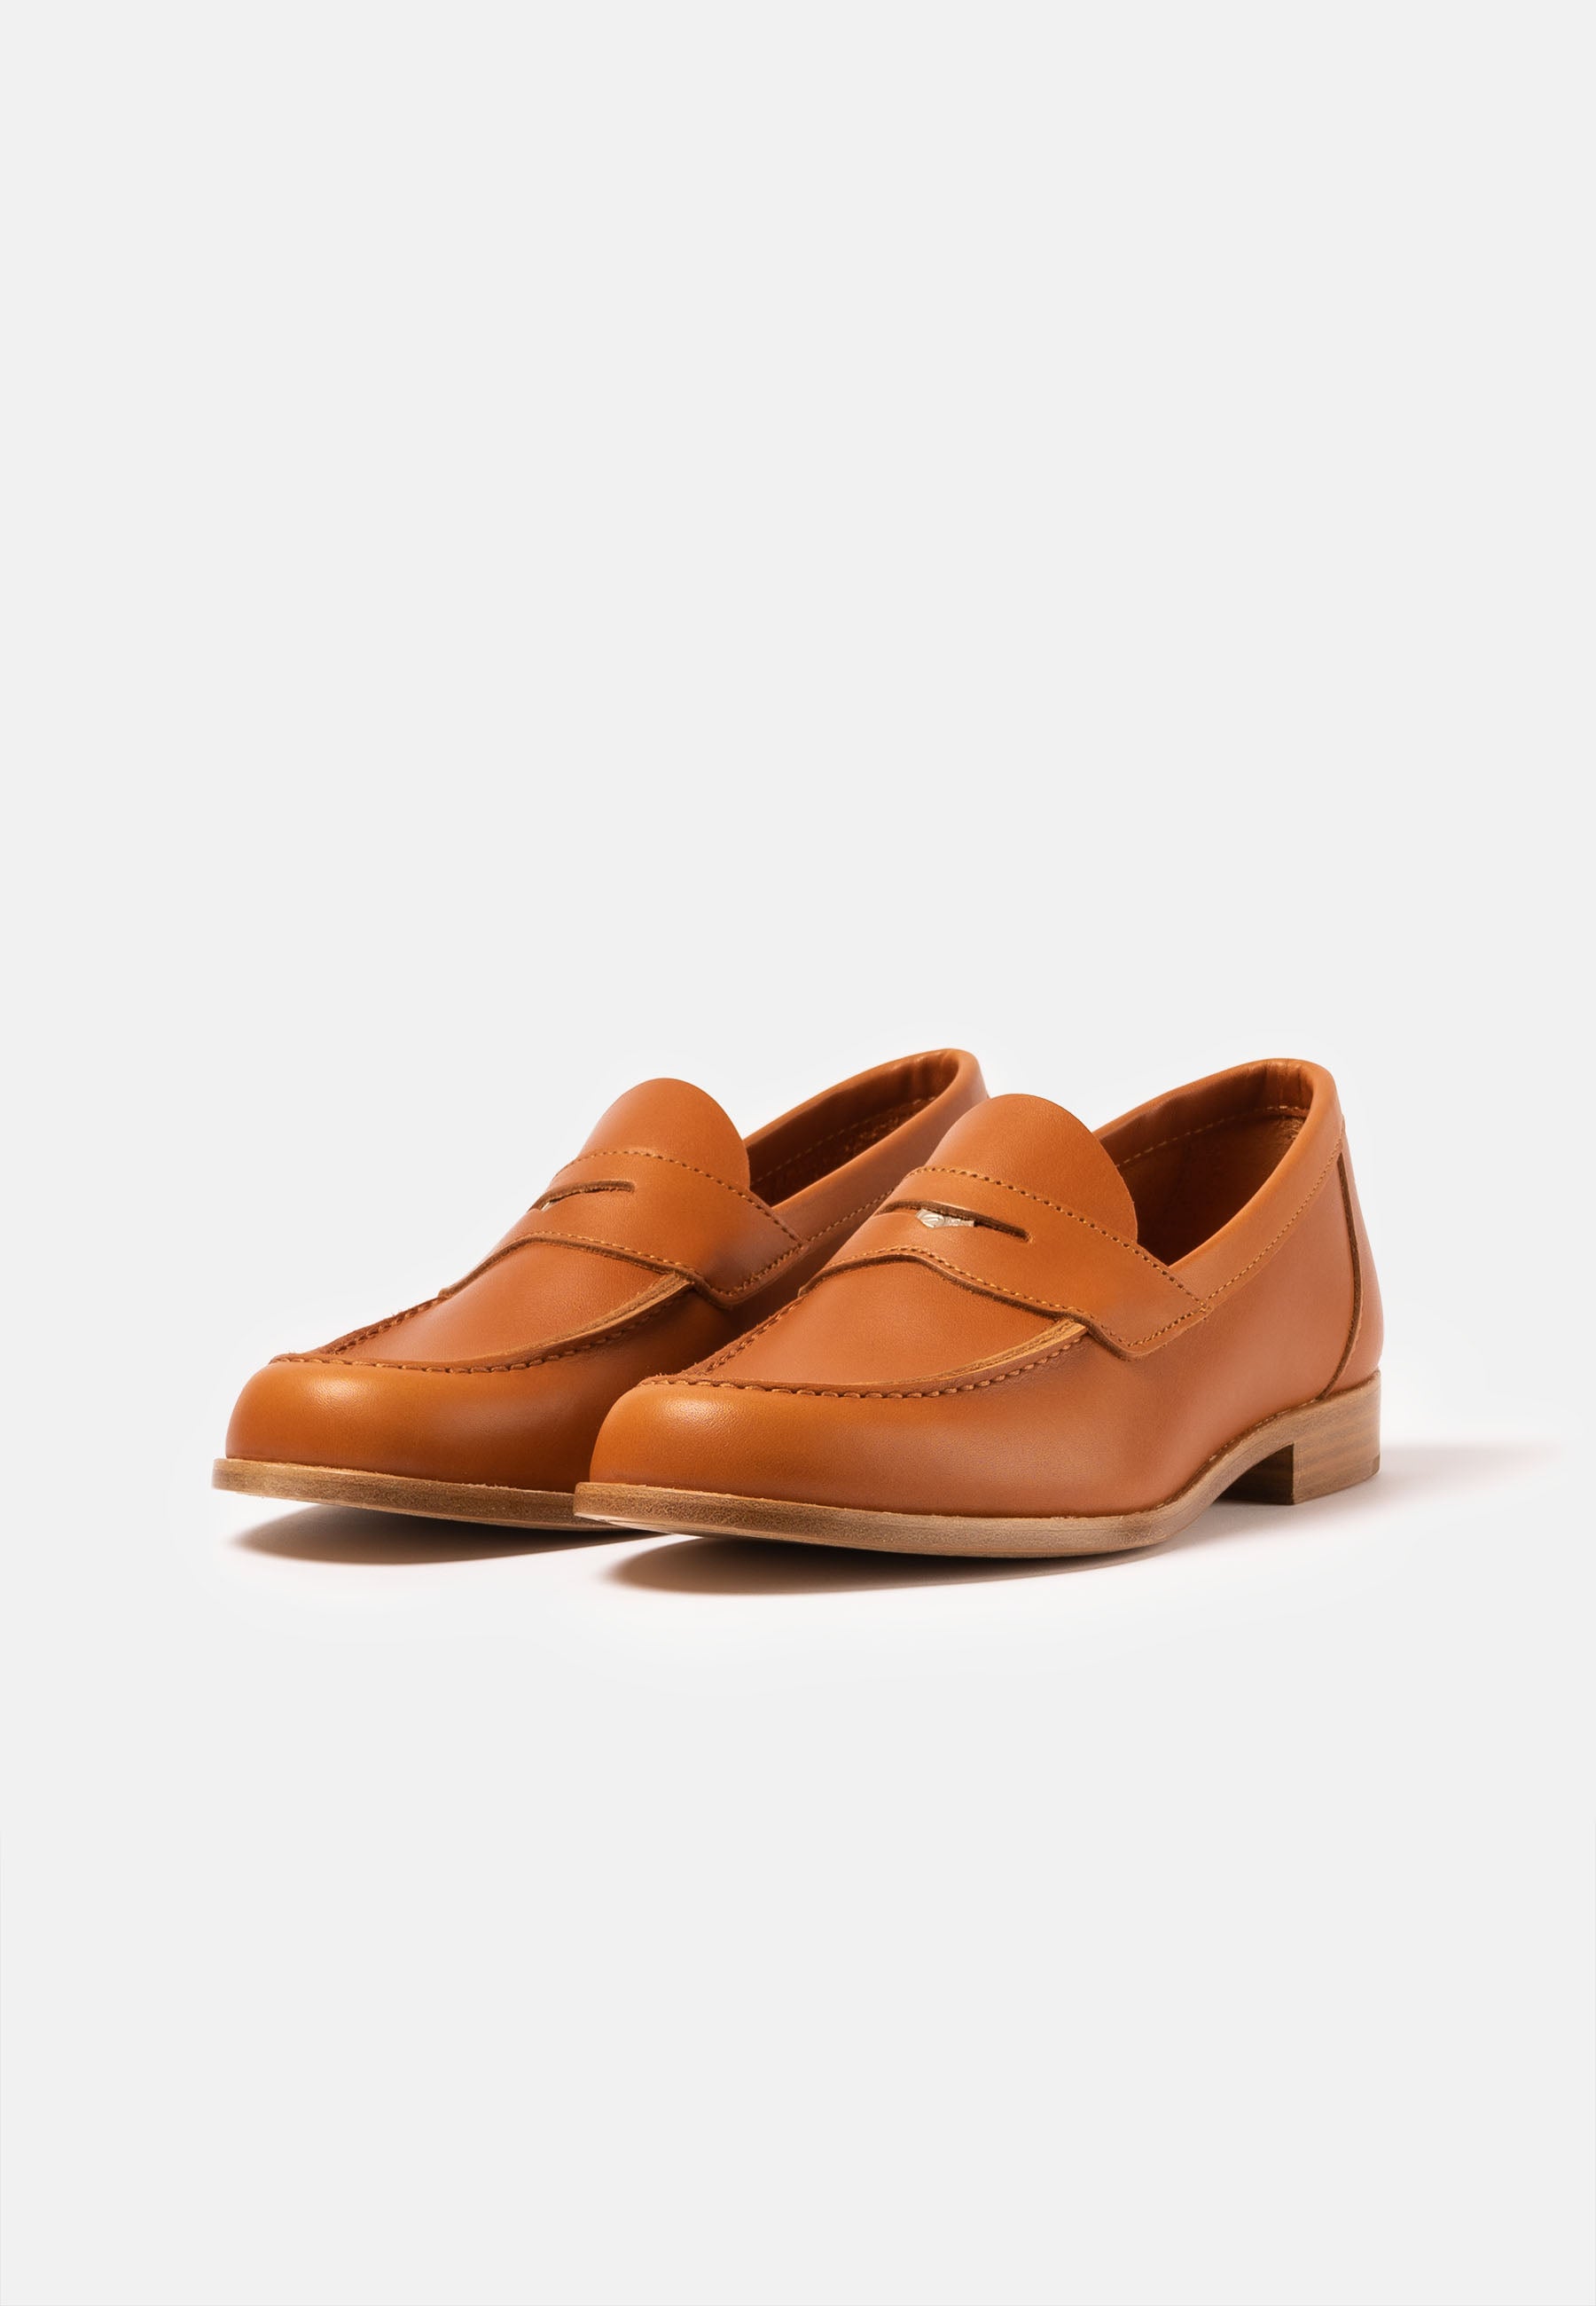 Buxton Naturell Nappa - The Original Penny Loafer